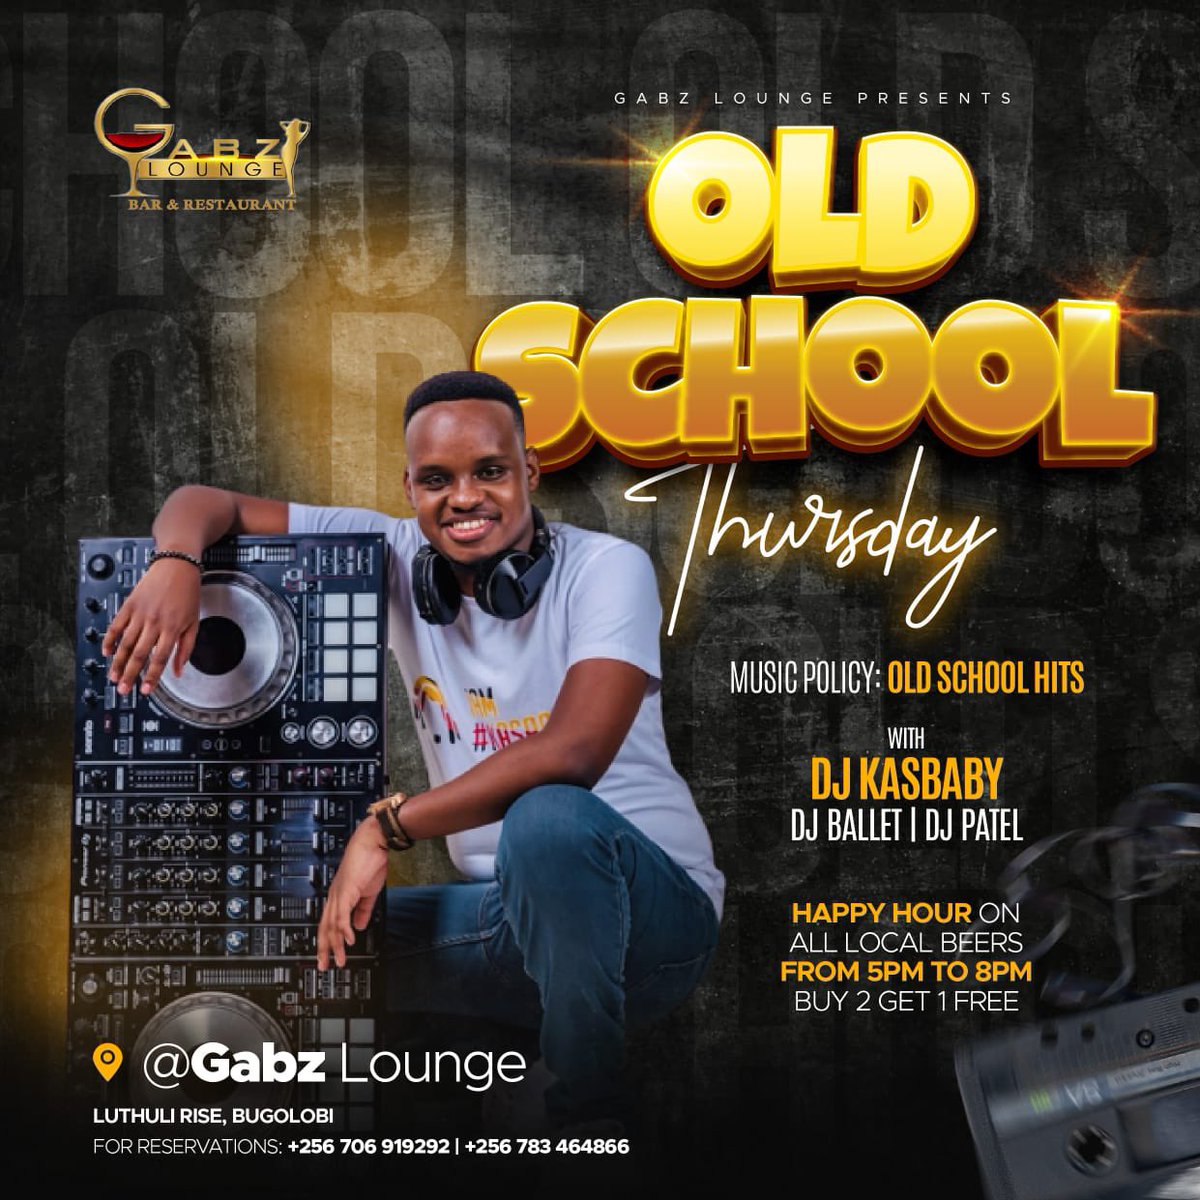 Tonight we celebrate the Gold in Old School! 💿 🎶 
All roads lead to @gabzlounge for #OldSchoolThursday with @DJKasBaby 
Happy Hour 🍻 on all beers from 5pm to 8pm.
#DJKasBaby #KasArmy #ThrowbackThursday